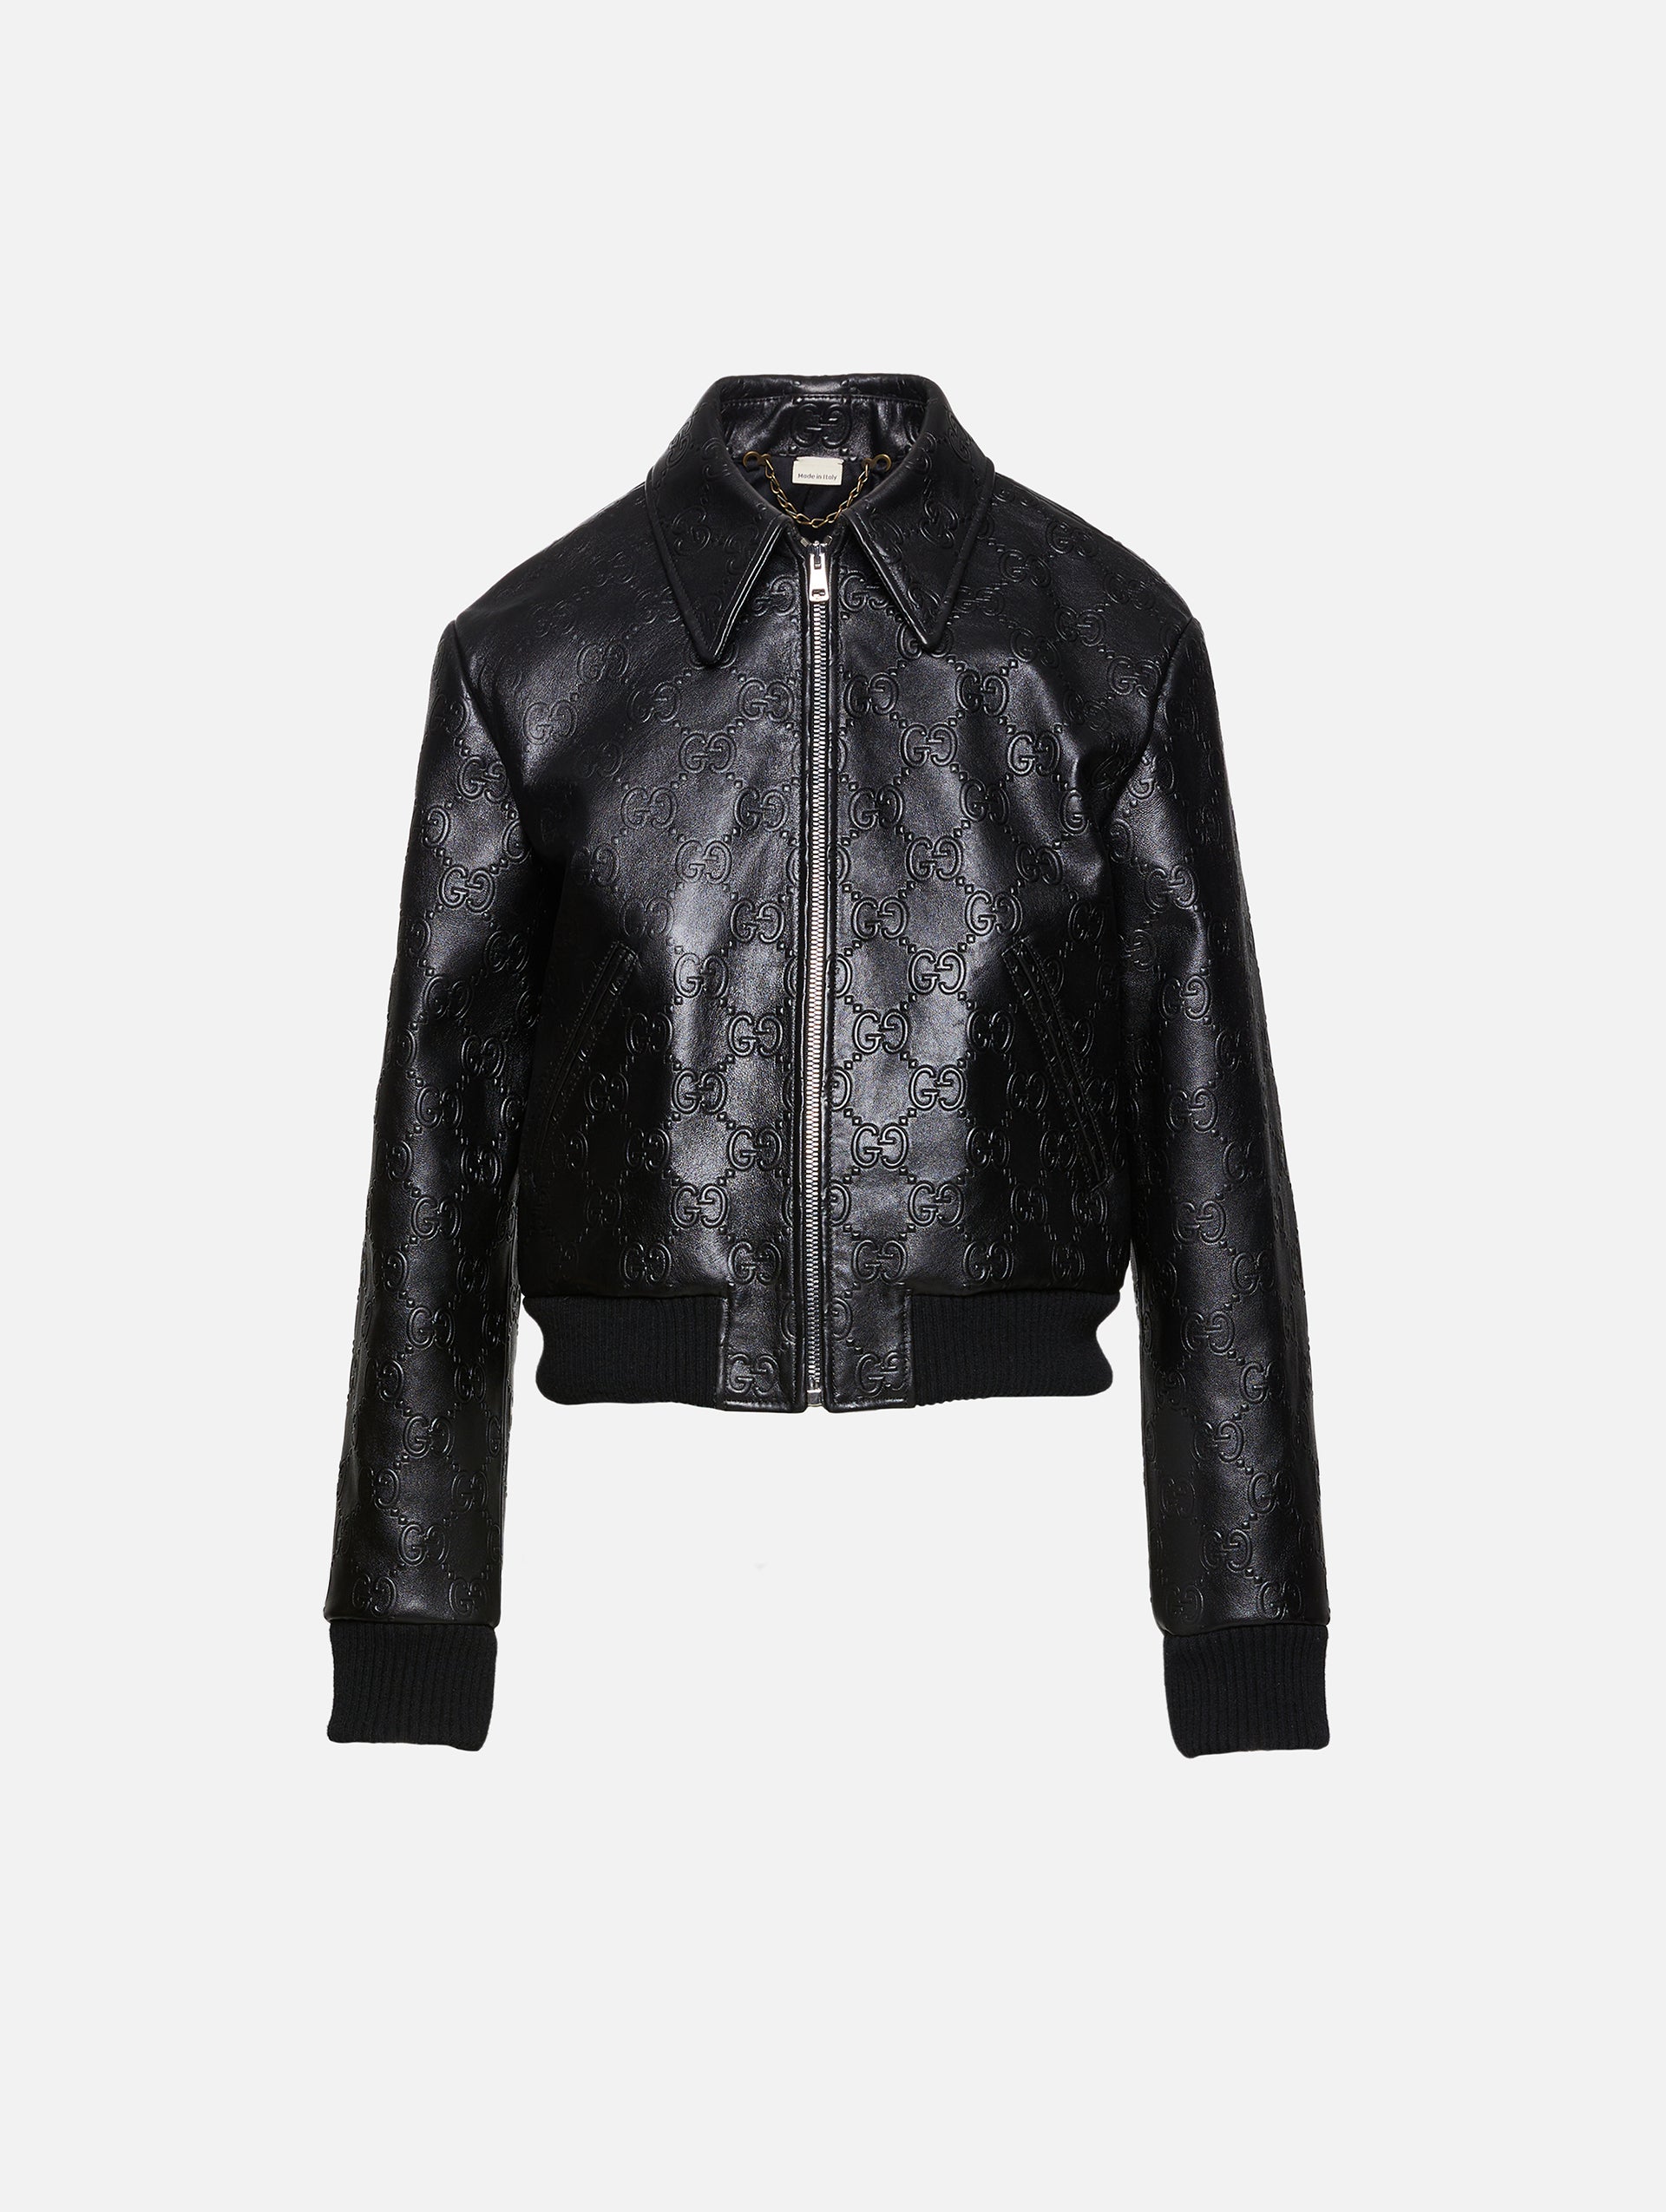 Black GG-embossed leather bomber jacket, Gucci